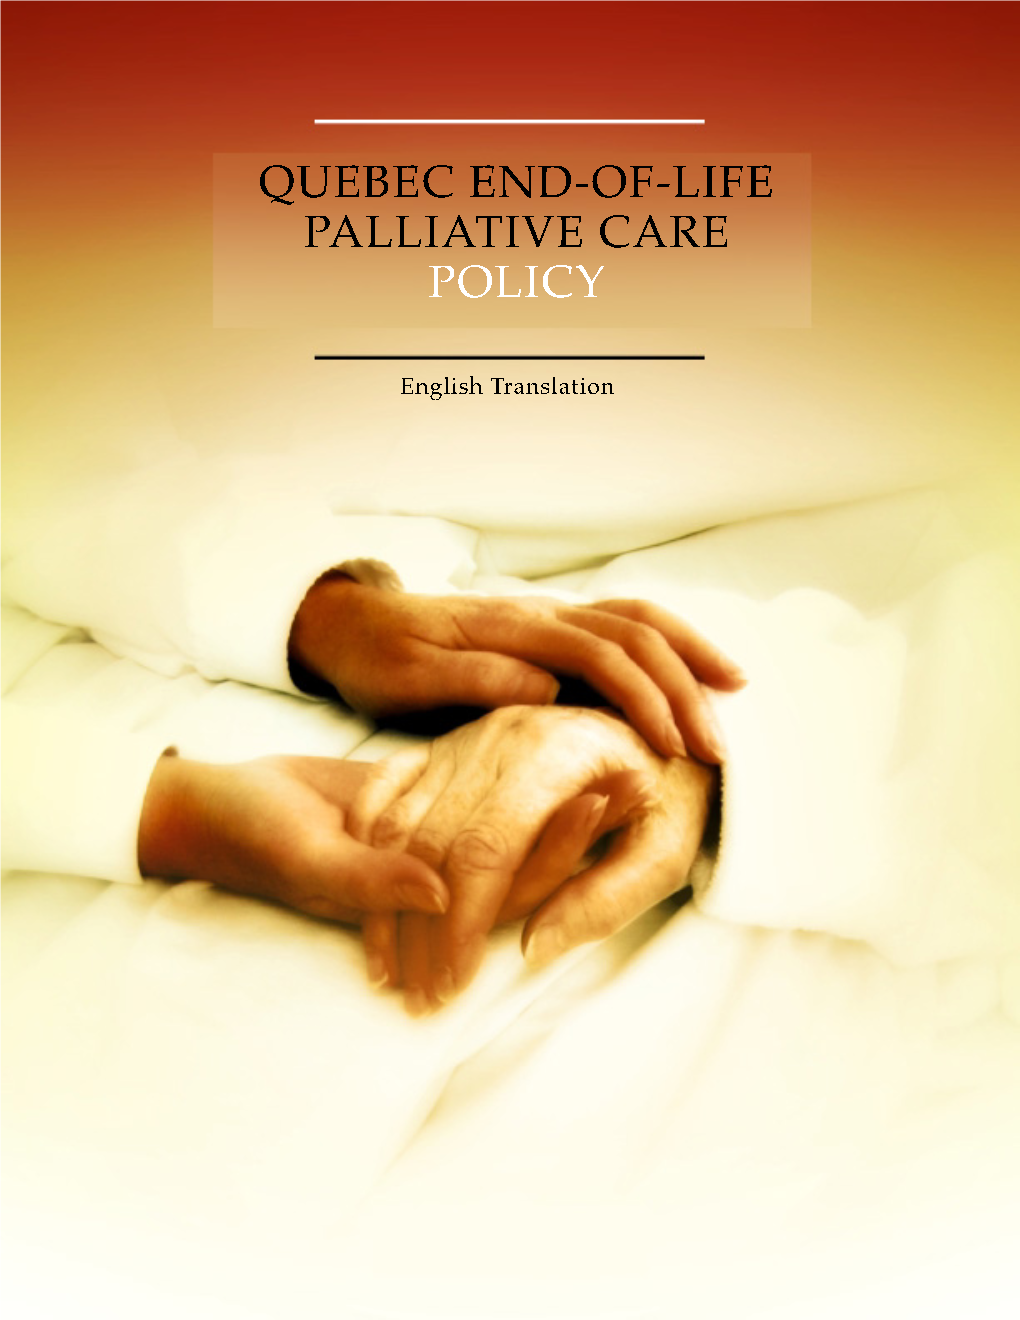 Quebec End-Of-Life Palliative Care Policy